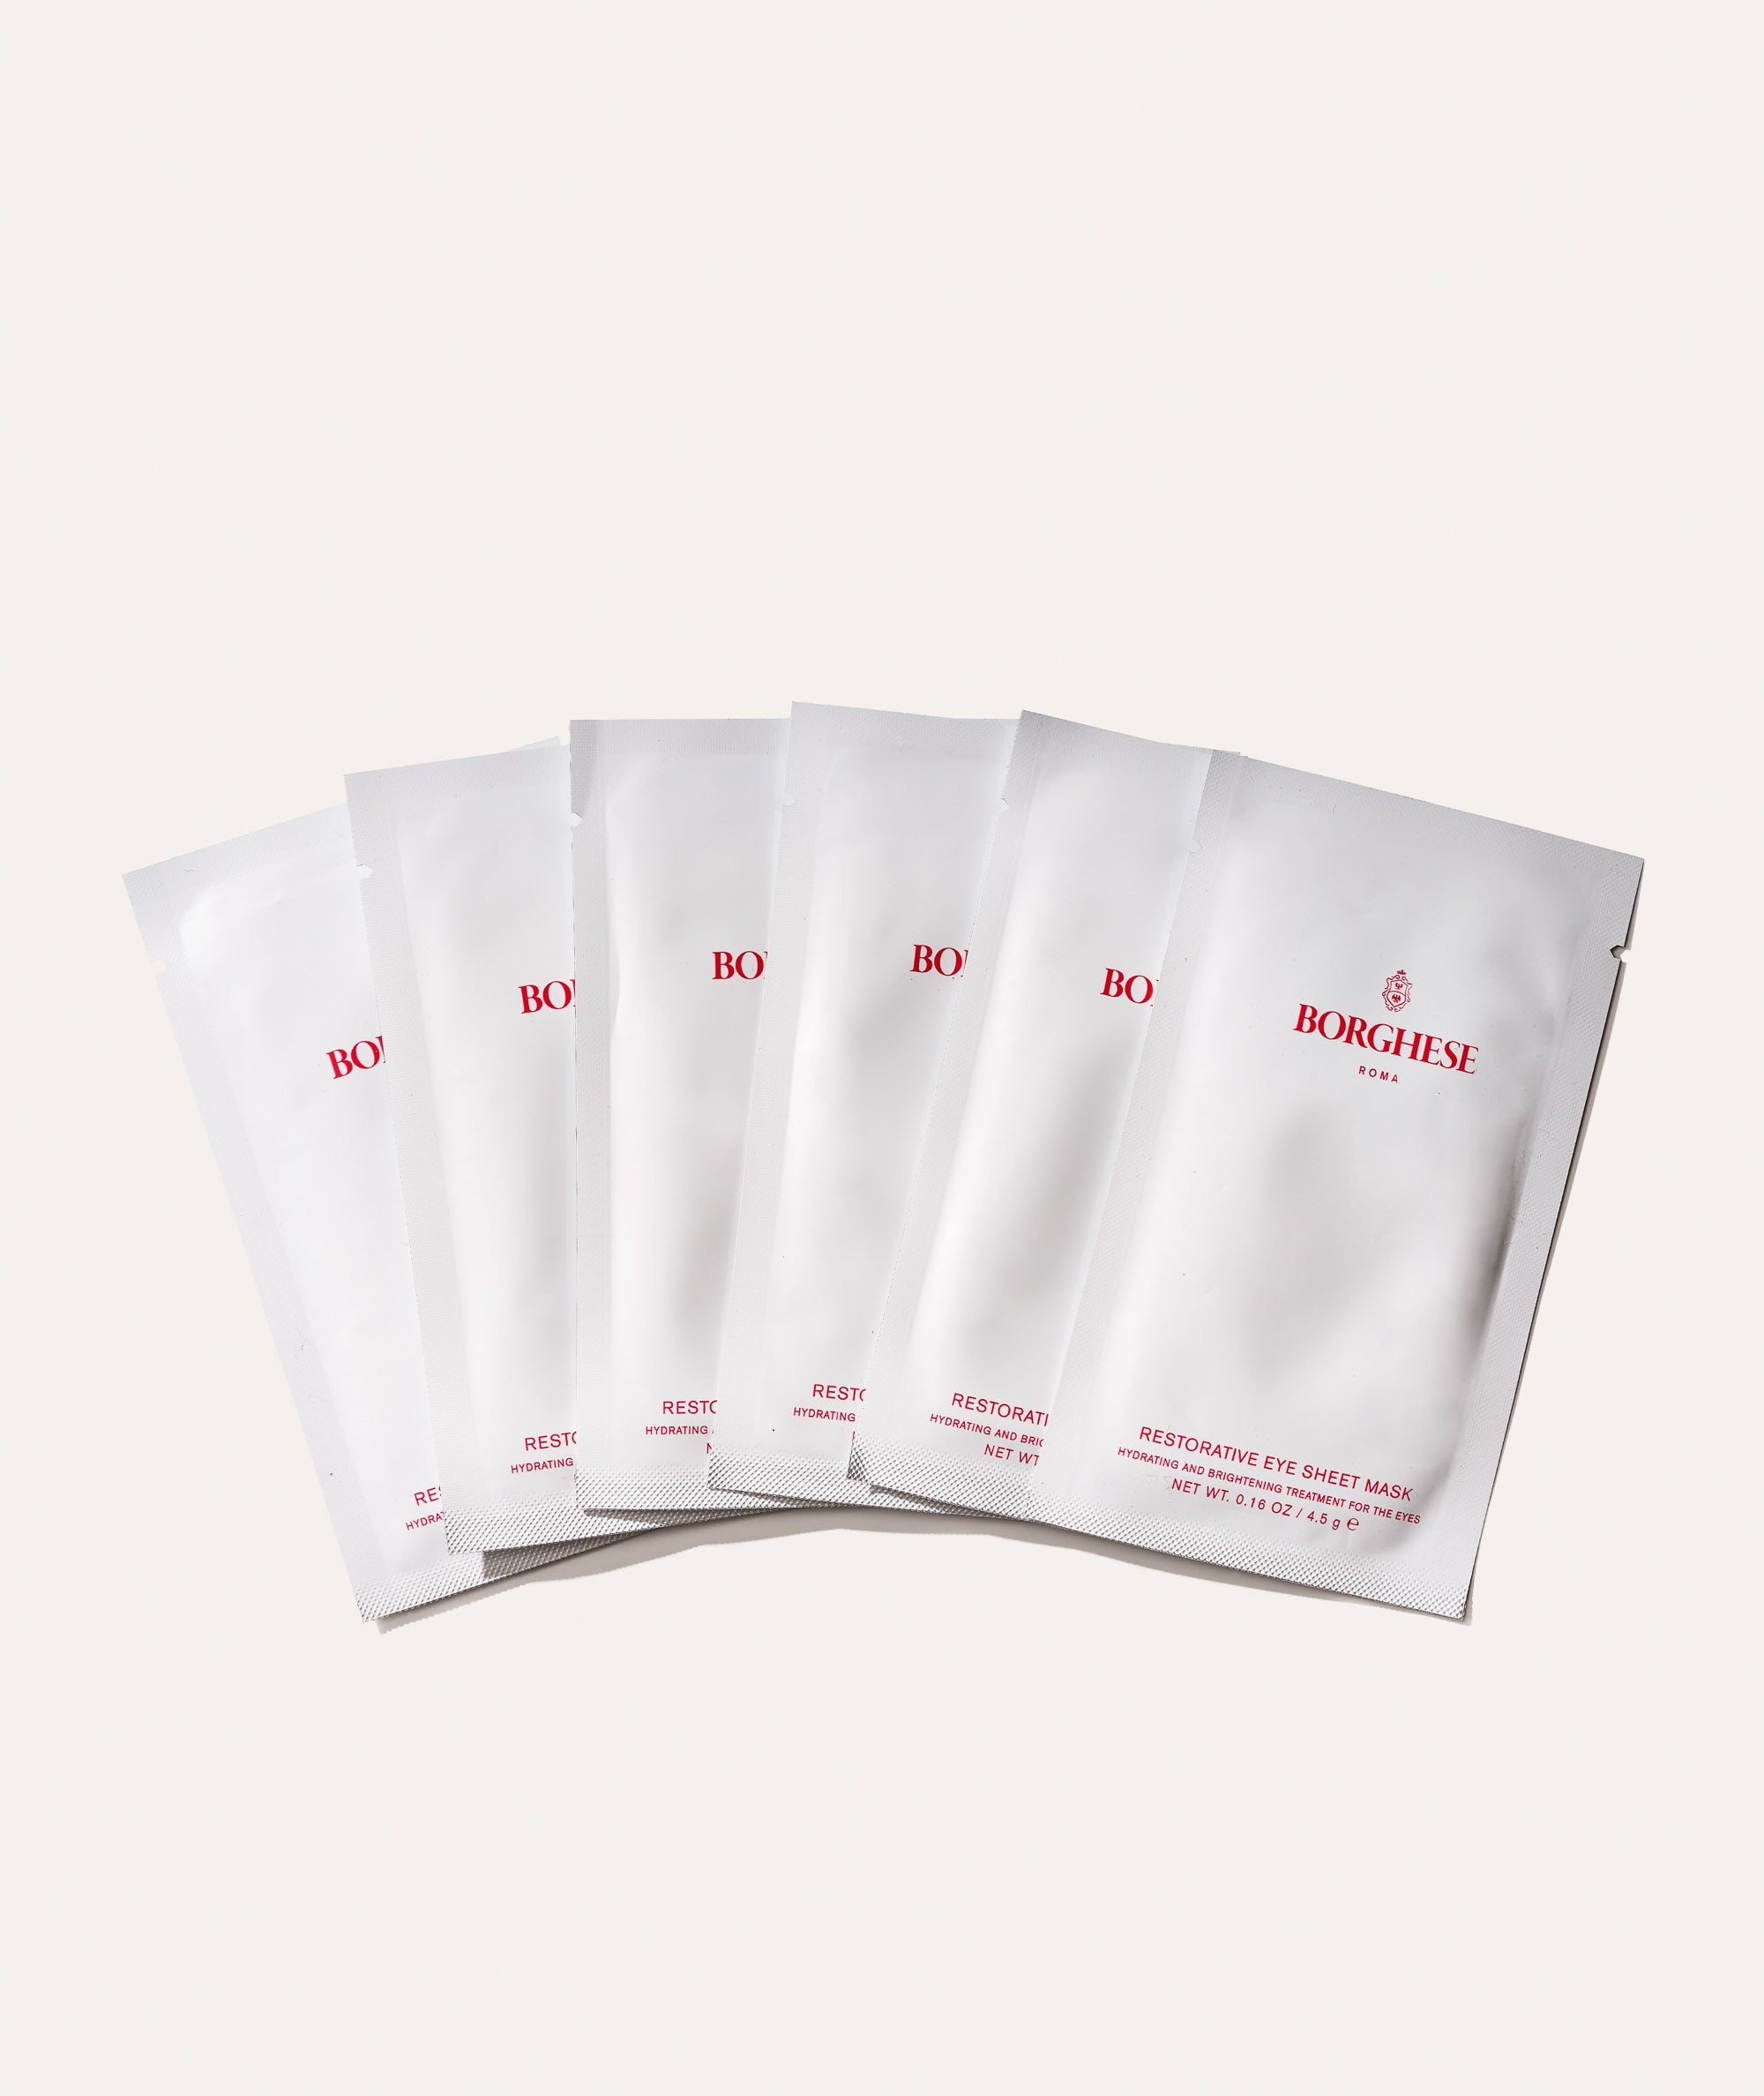 This is a picture of 6 Borghese Restorative Eye Sheet Mask packettes